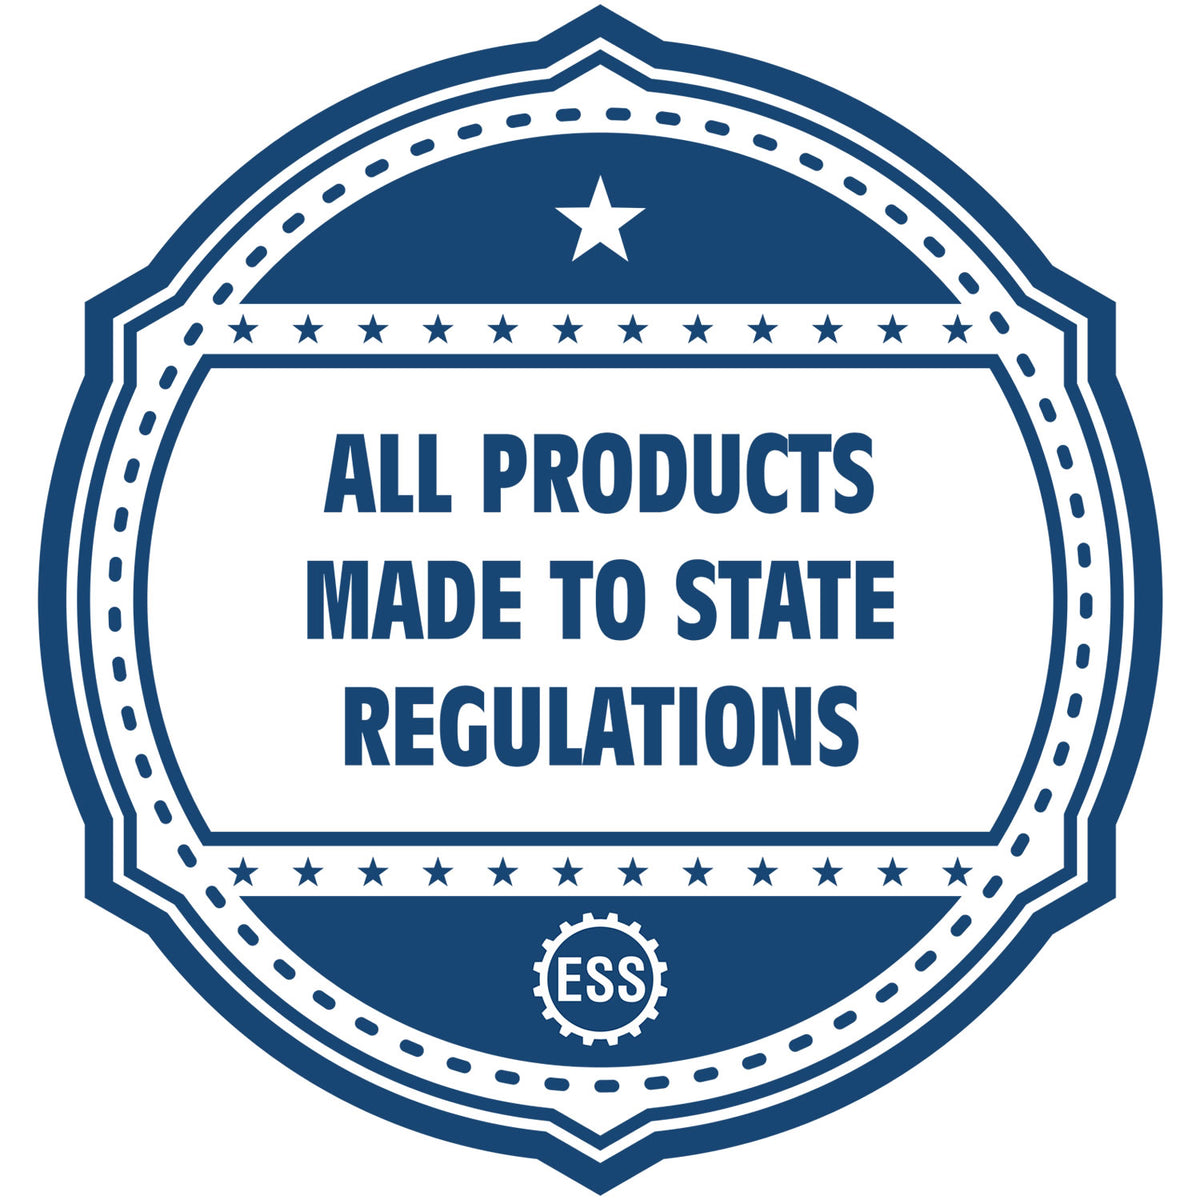 An icon or badge element for the MaxLight Premium Pre-Inked Montana State Seal Notarial Stamp showing that this product is made in compliance with state regulations.